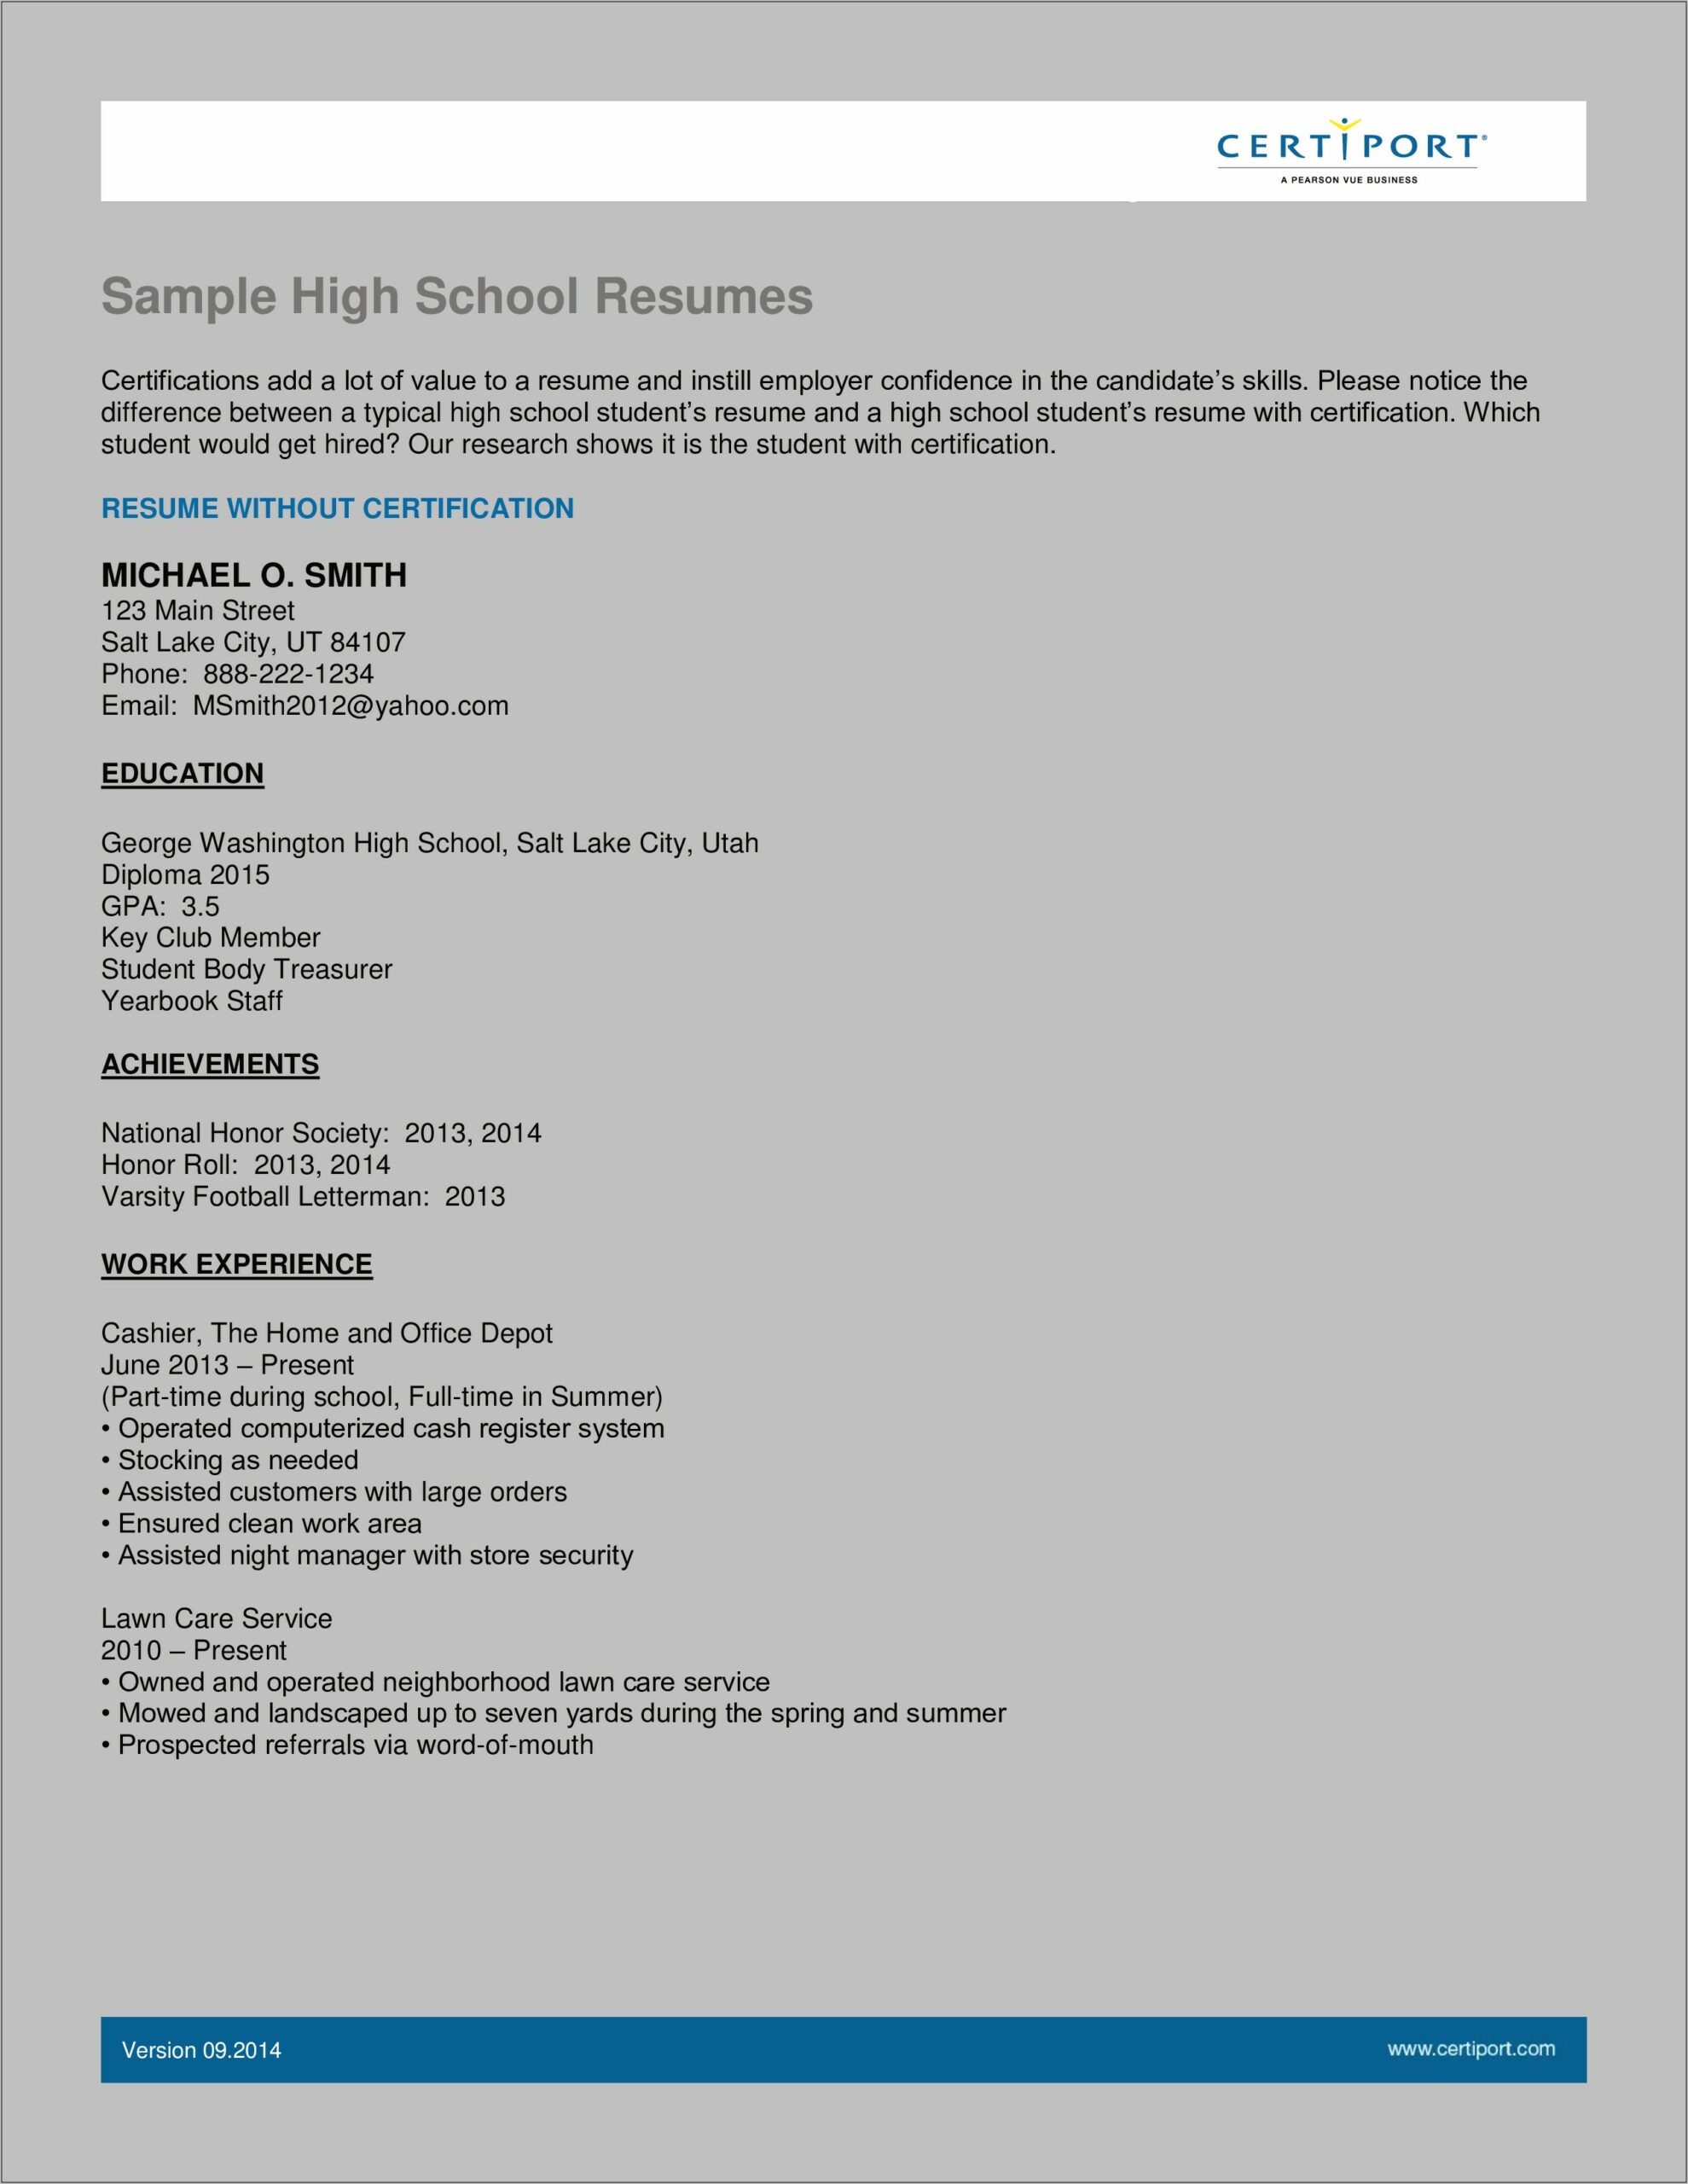 Resume For High School Student Gear Up